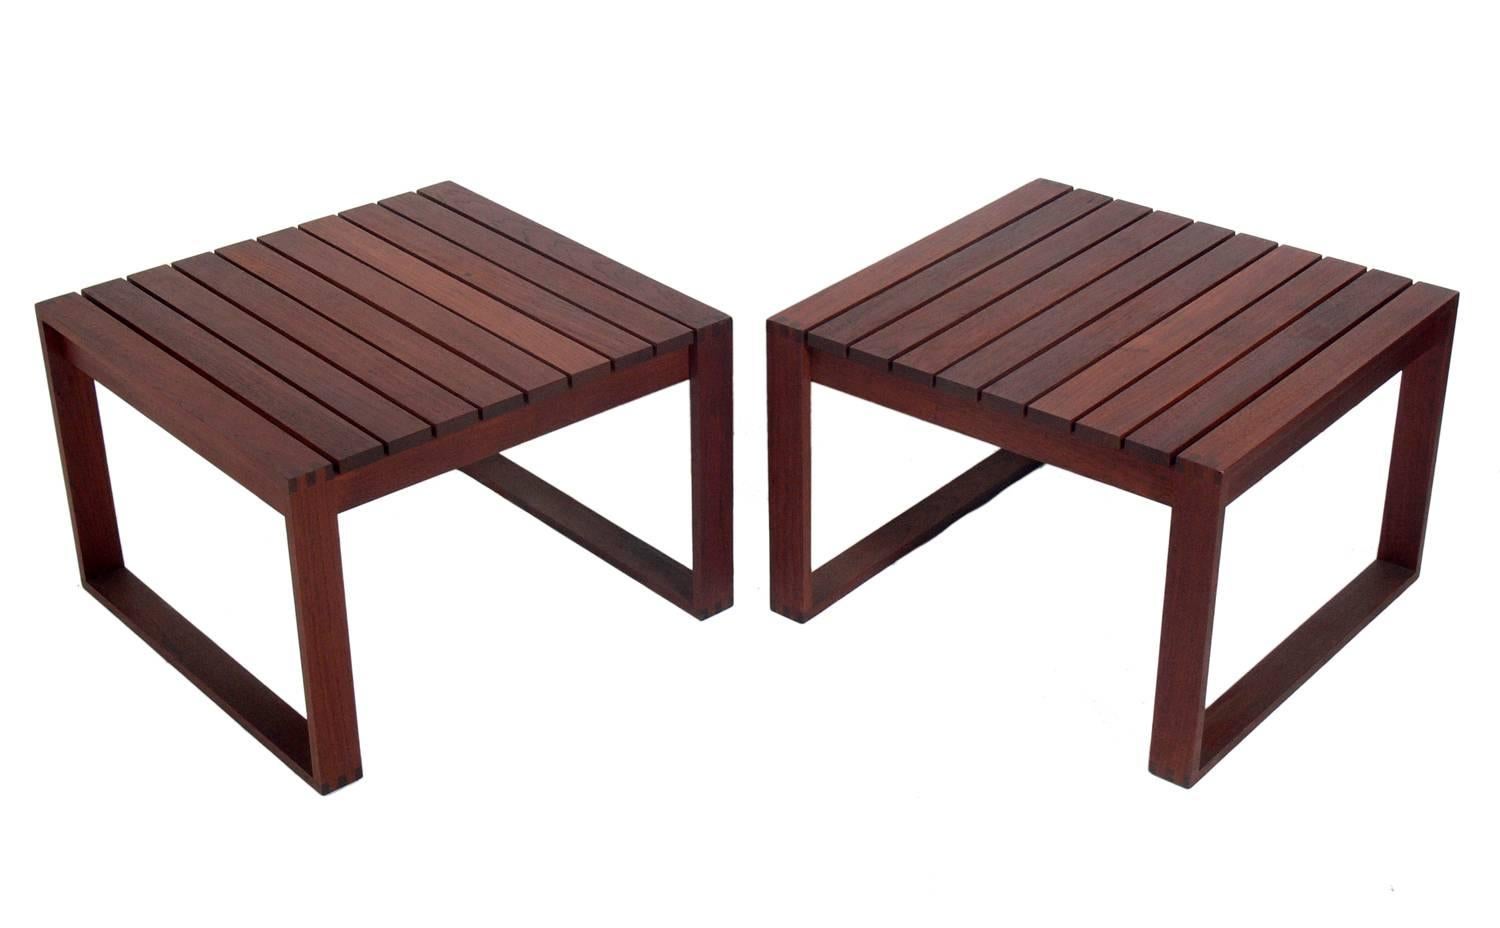 Pair of Danish modern teak slat end tables, Denmark, circa 1960s. They are a versatile size and can be used as end or side tables, or as nightstands.